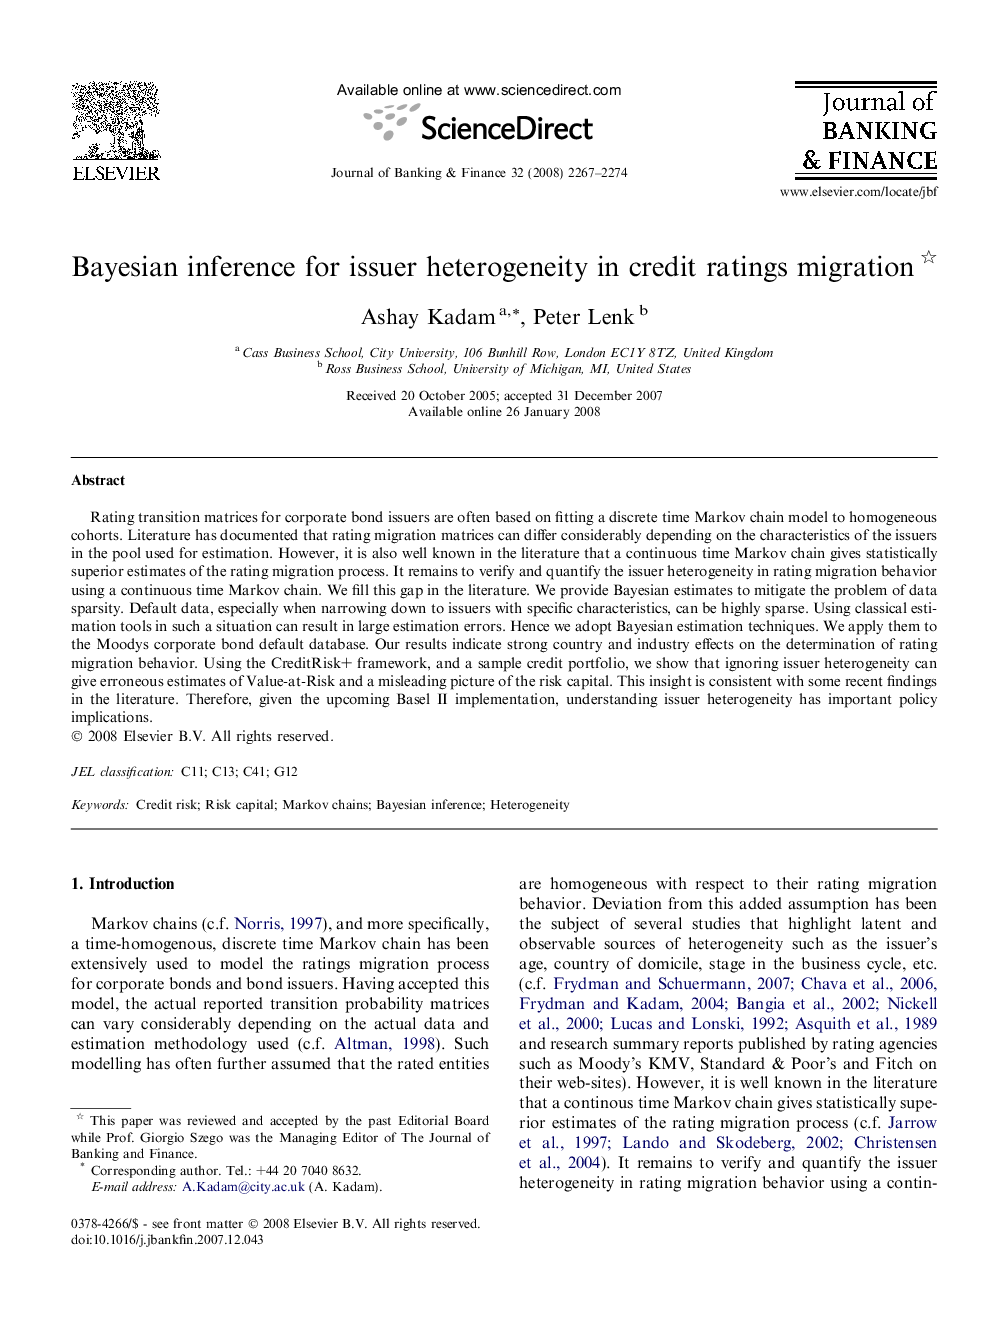 Bayesian inference for issuer heterogeneity in credit ratings migration